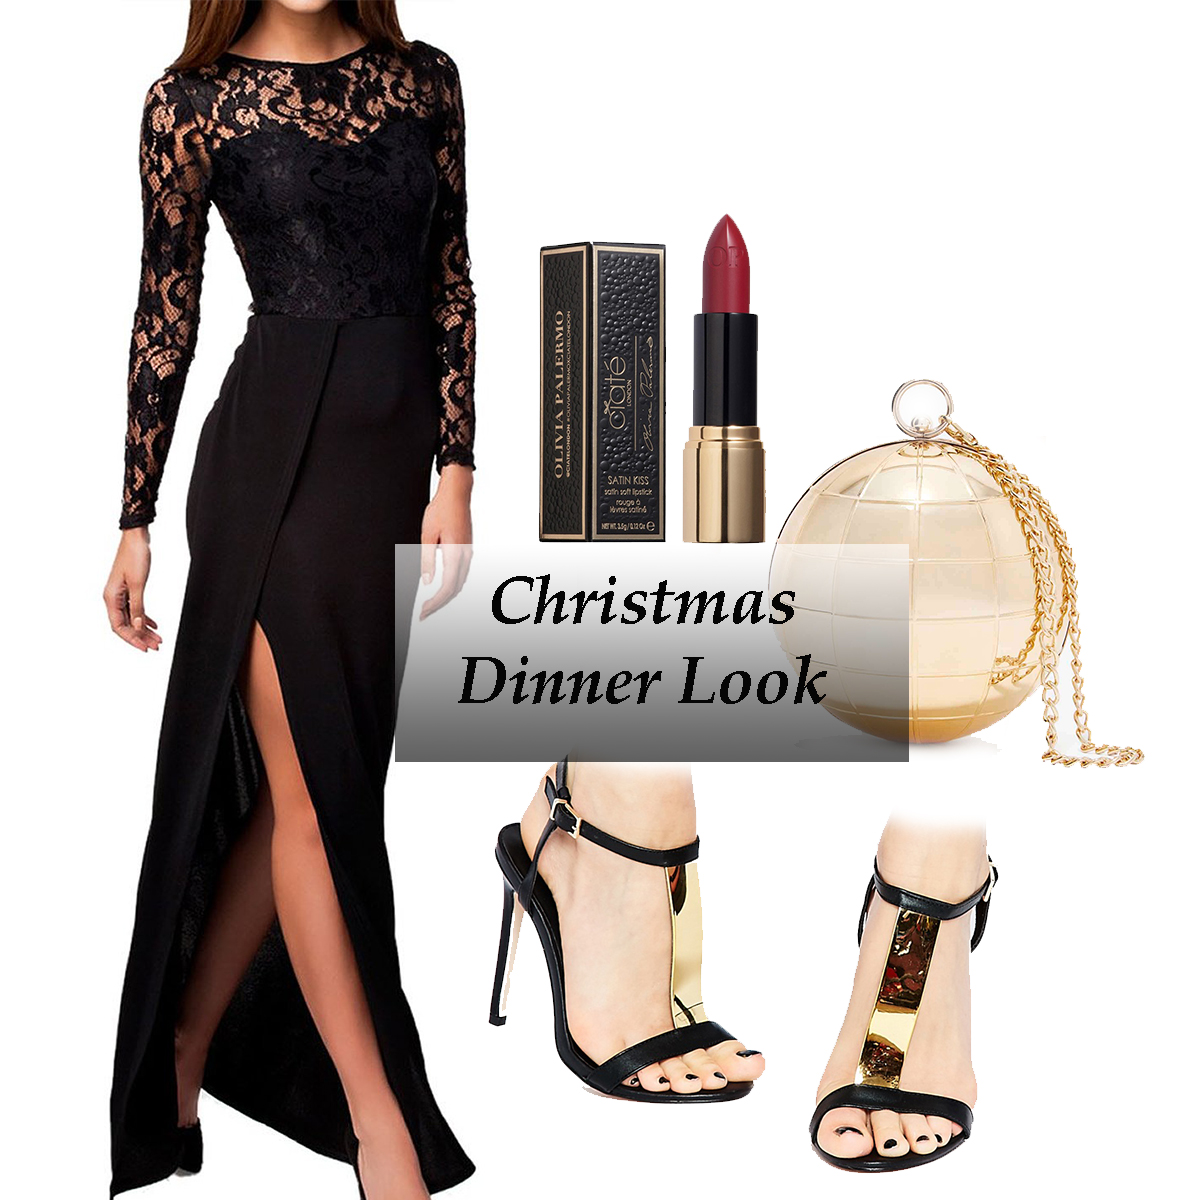 Christmas holiday look for dinner